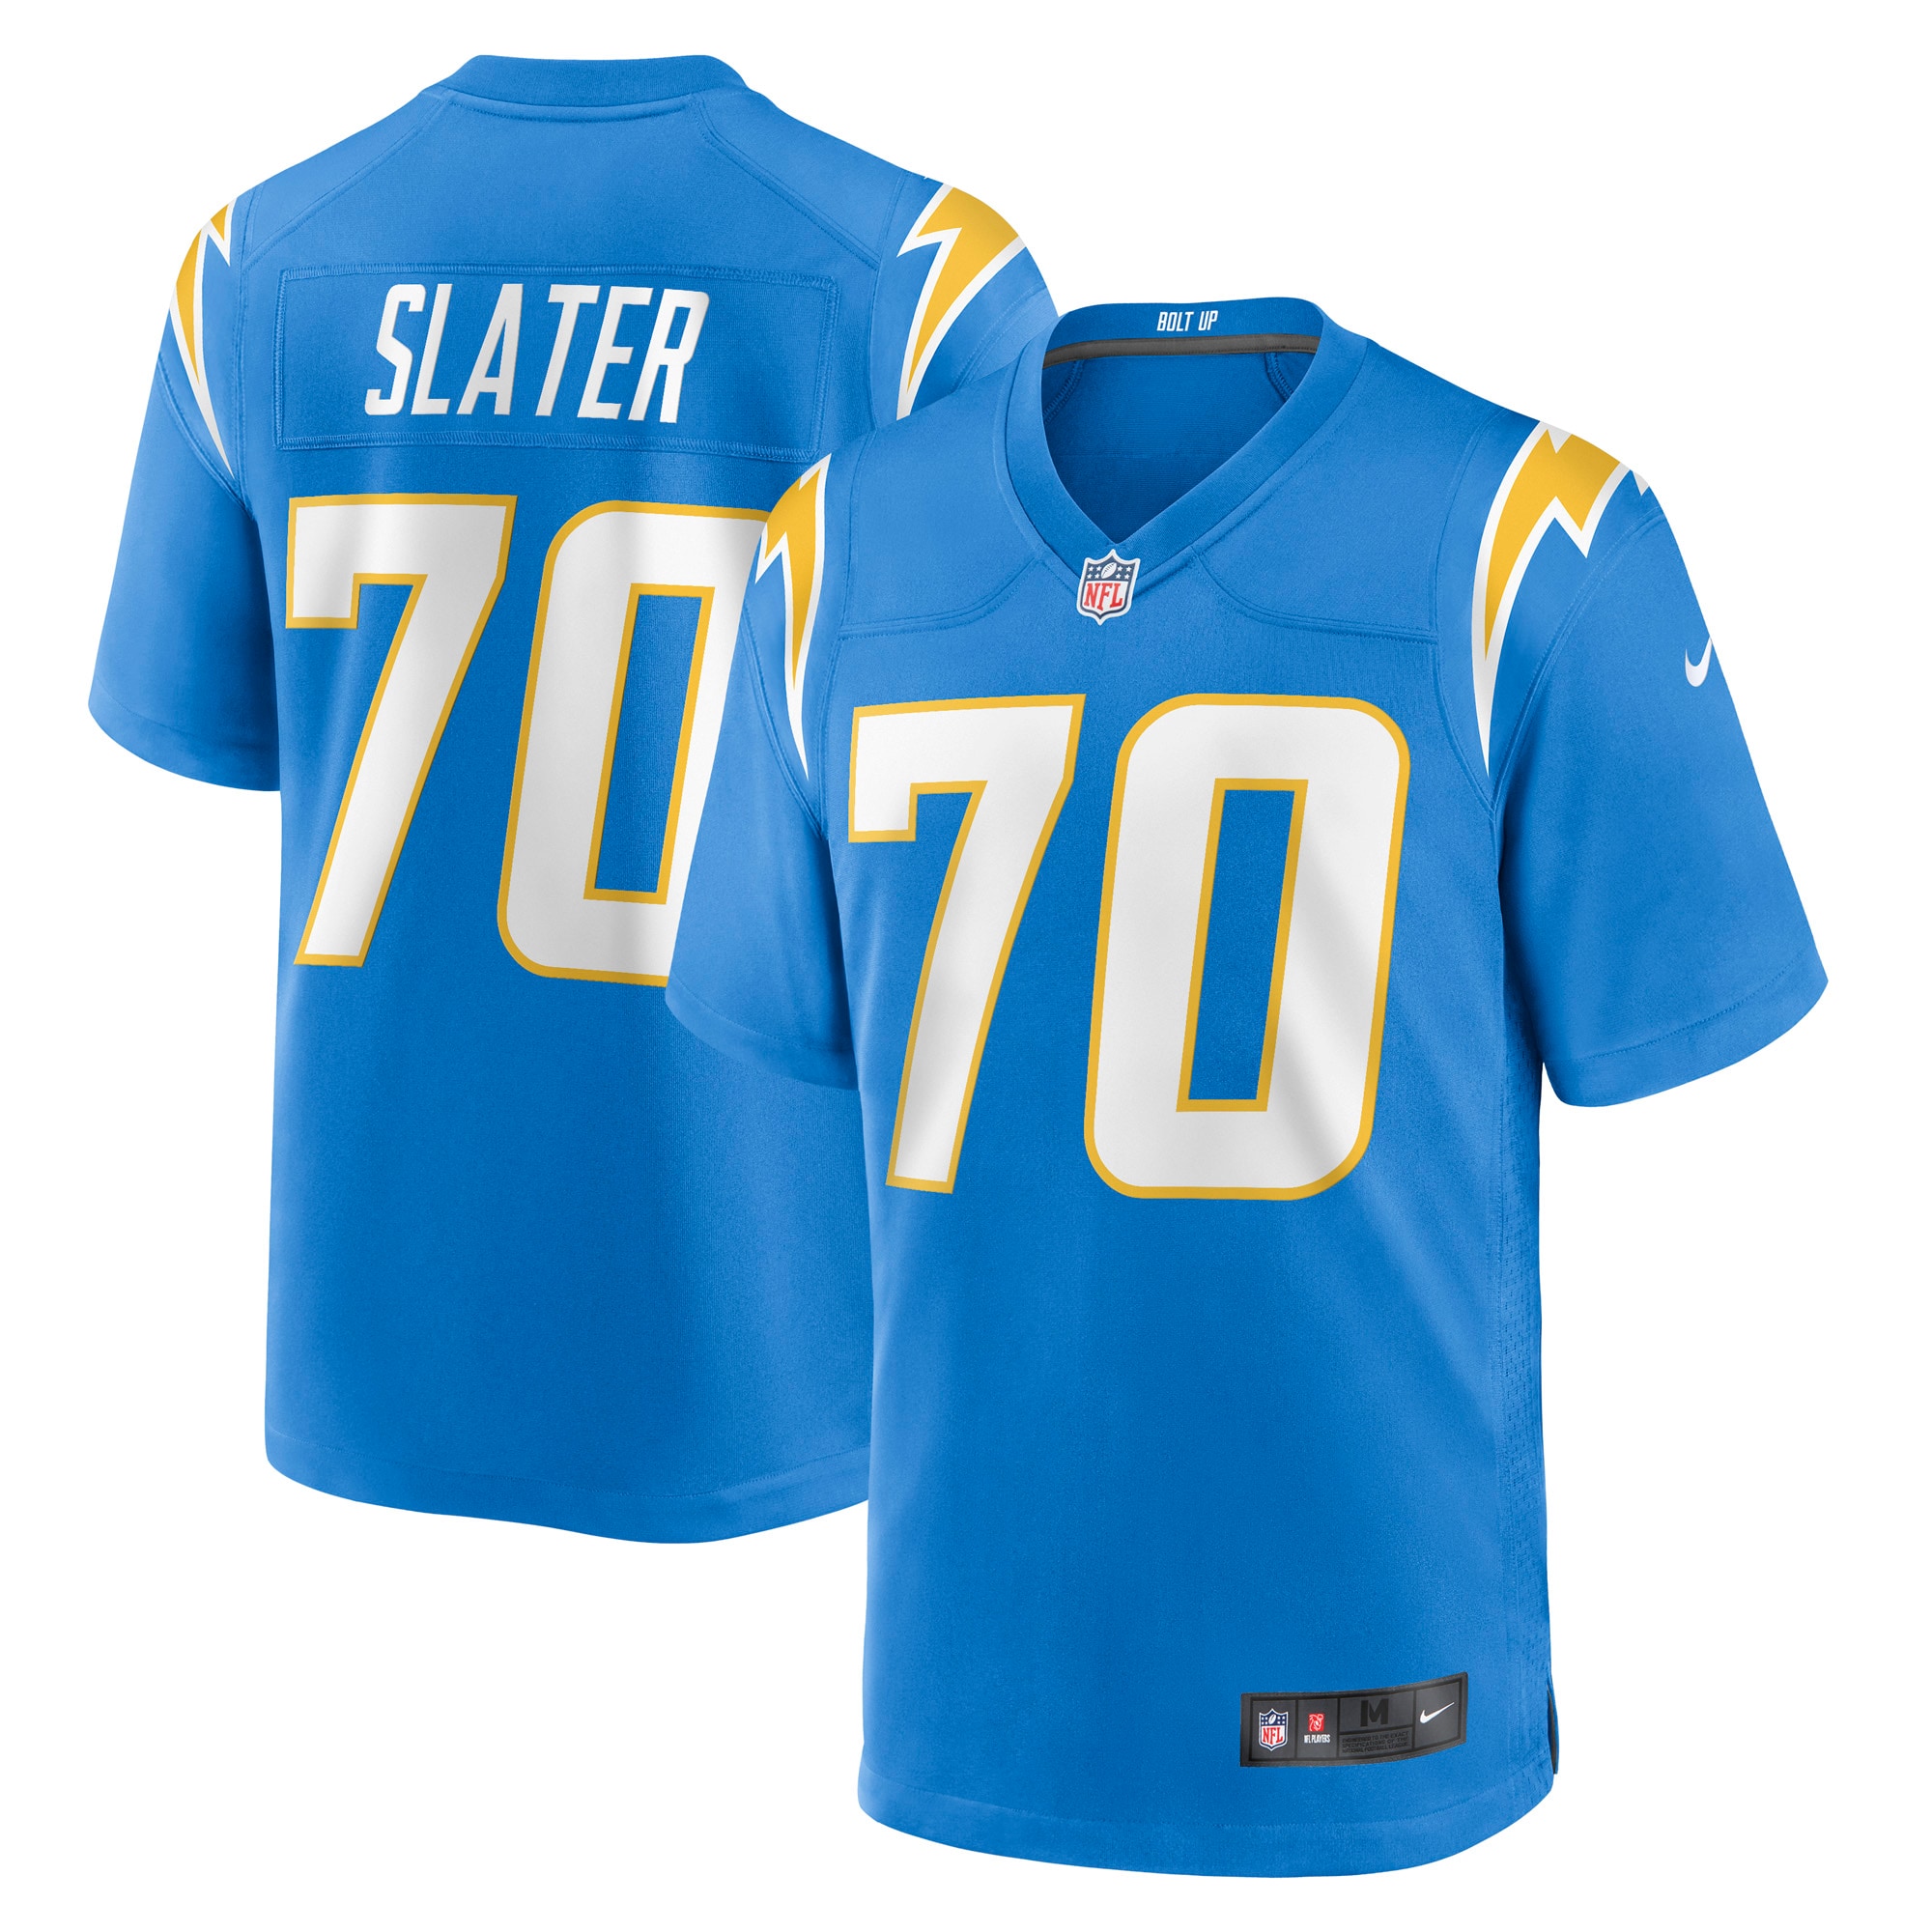 Men's Los Angeles Chargers Jerseys Powder Blue Rashawn Slater Game Style